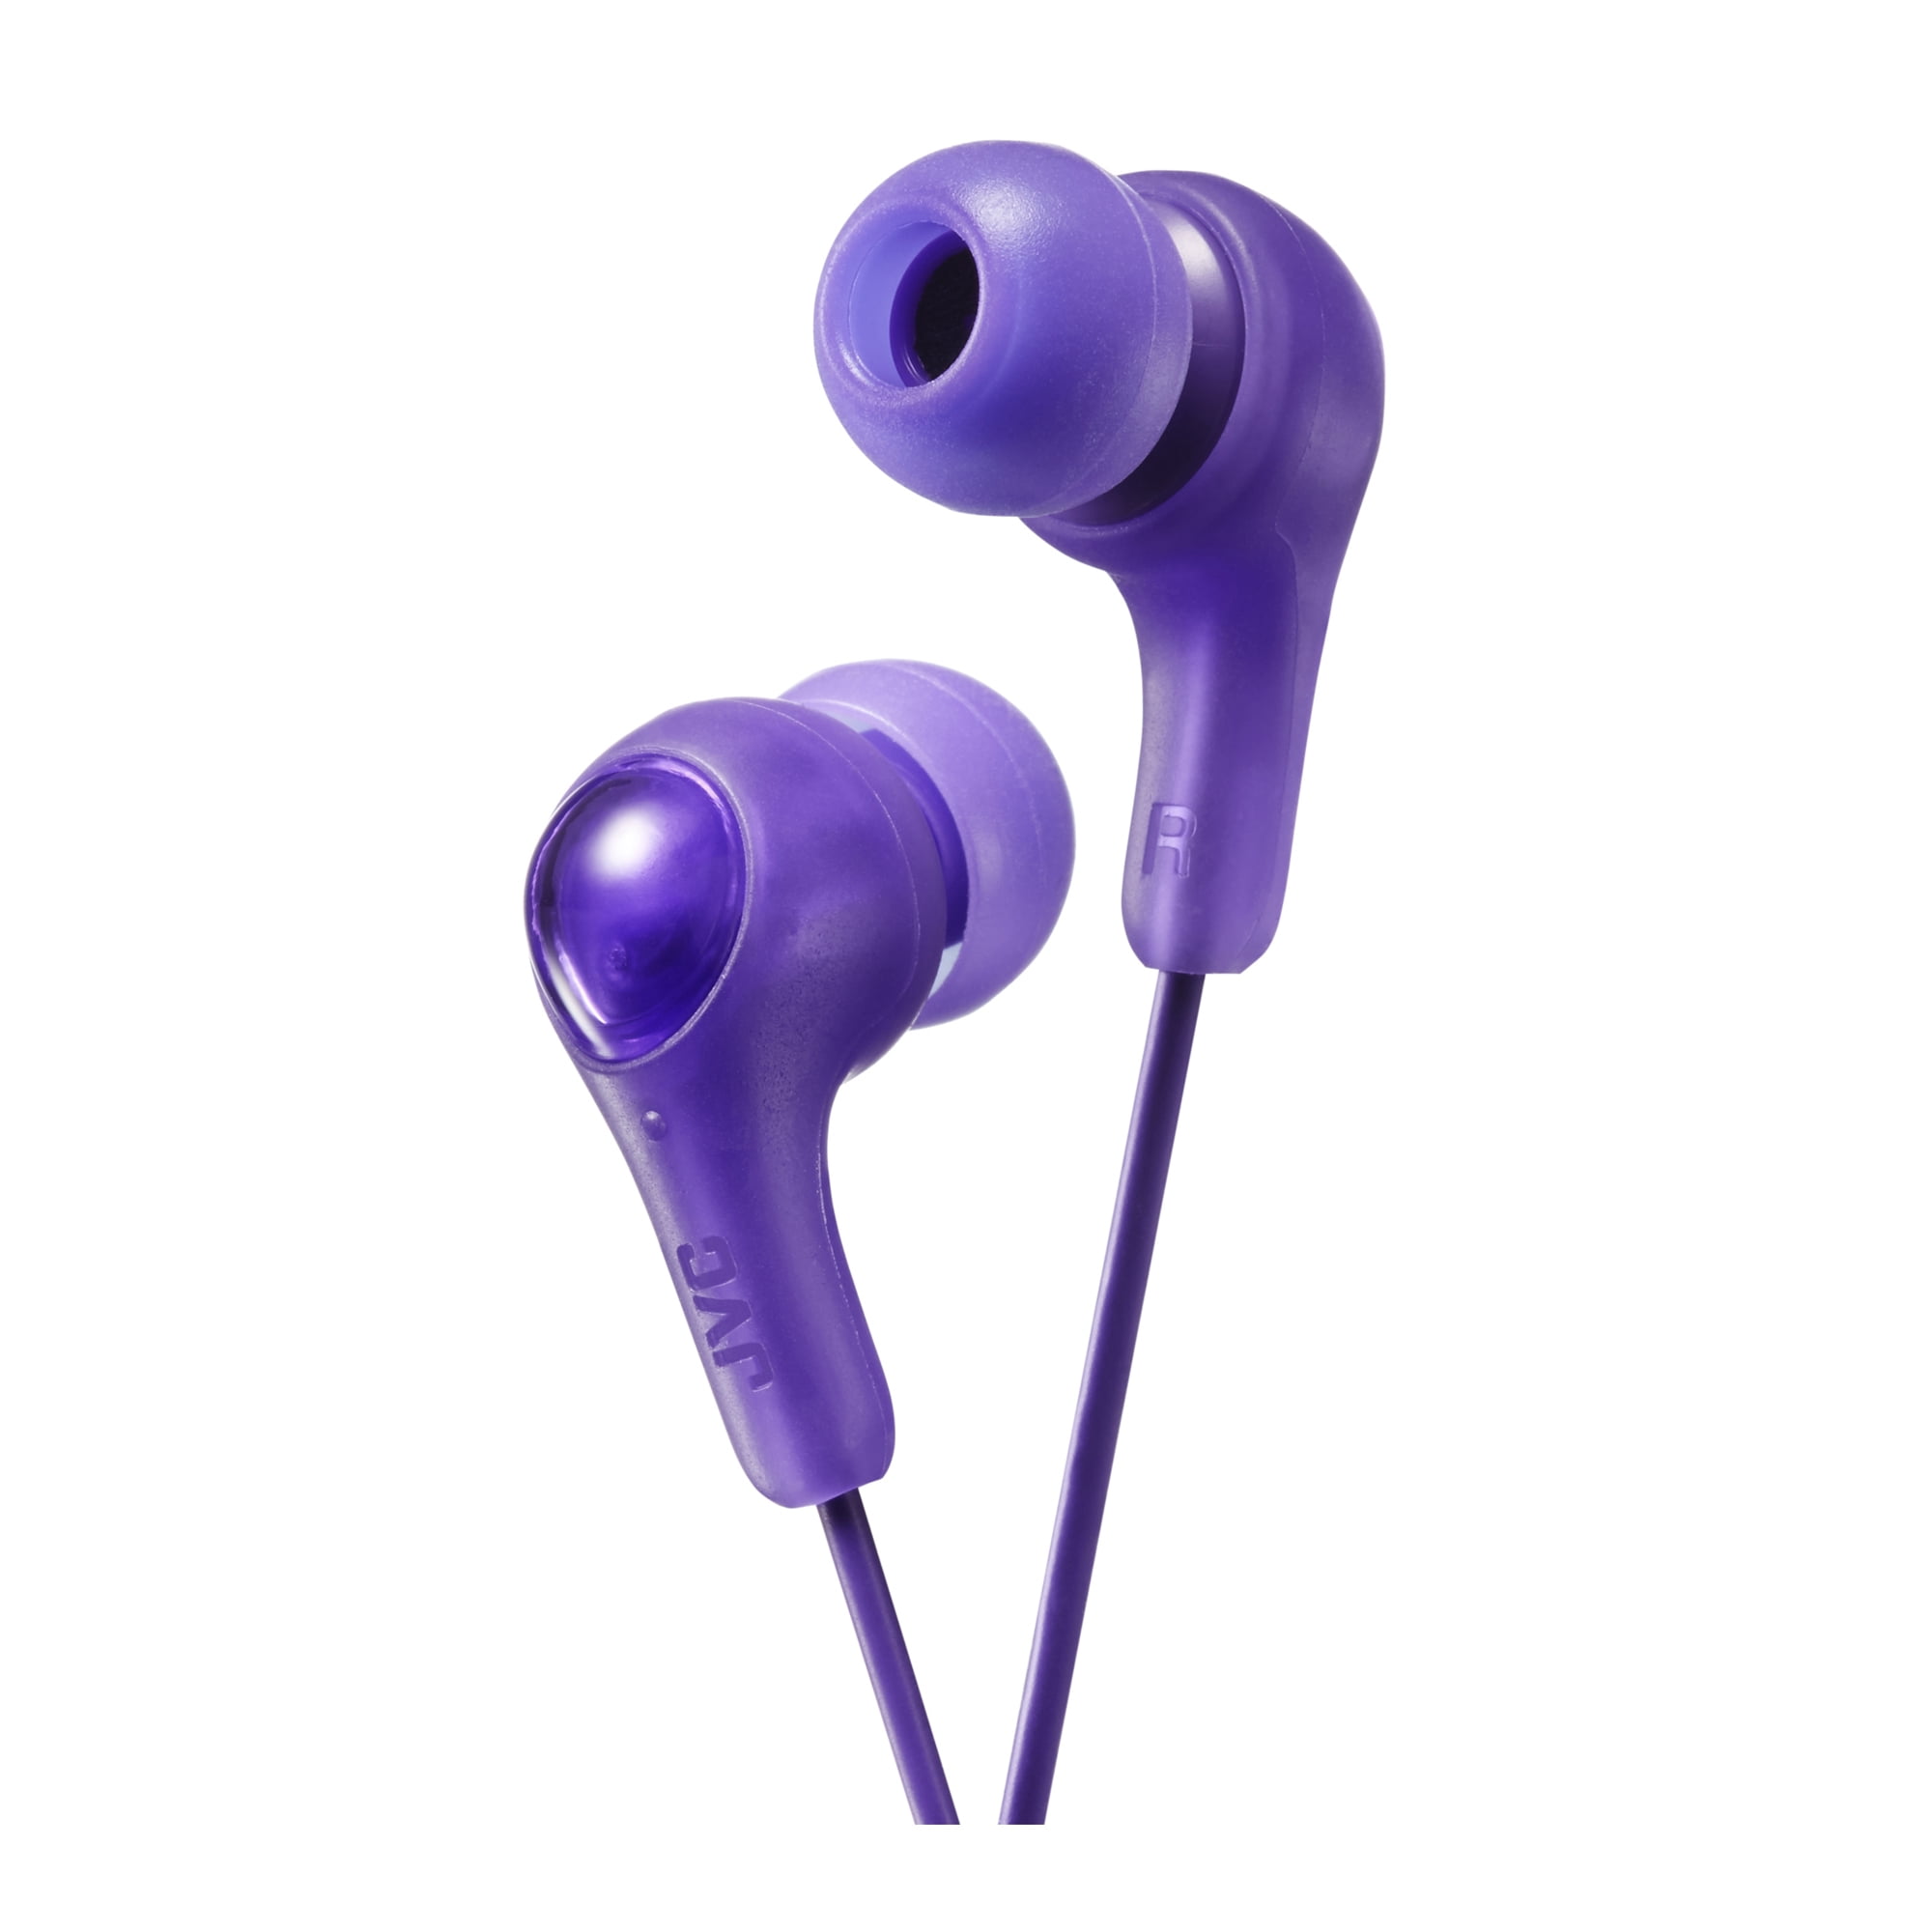 JVC Gumy Plus Earbuds – in Ear Headphones (HA-FX7VN), Powerful Sound, Comfortable and Secure Fit, Comes with S/M/L Silicone Ear Pieces, 3.3 ft Cord (Purple)